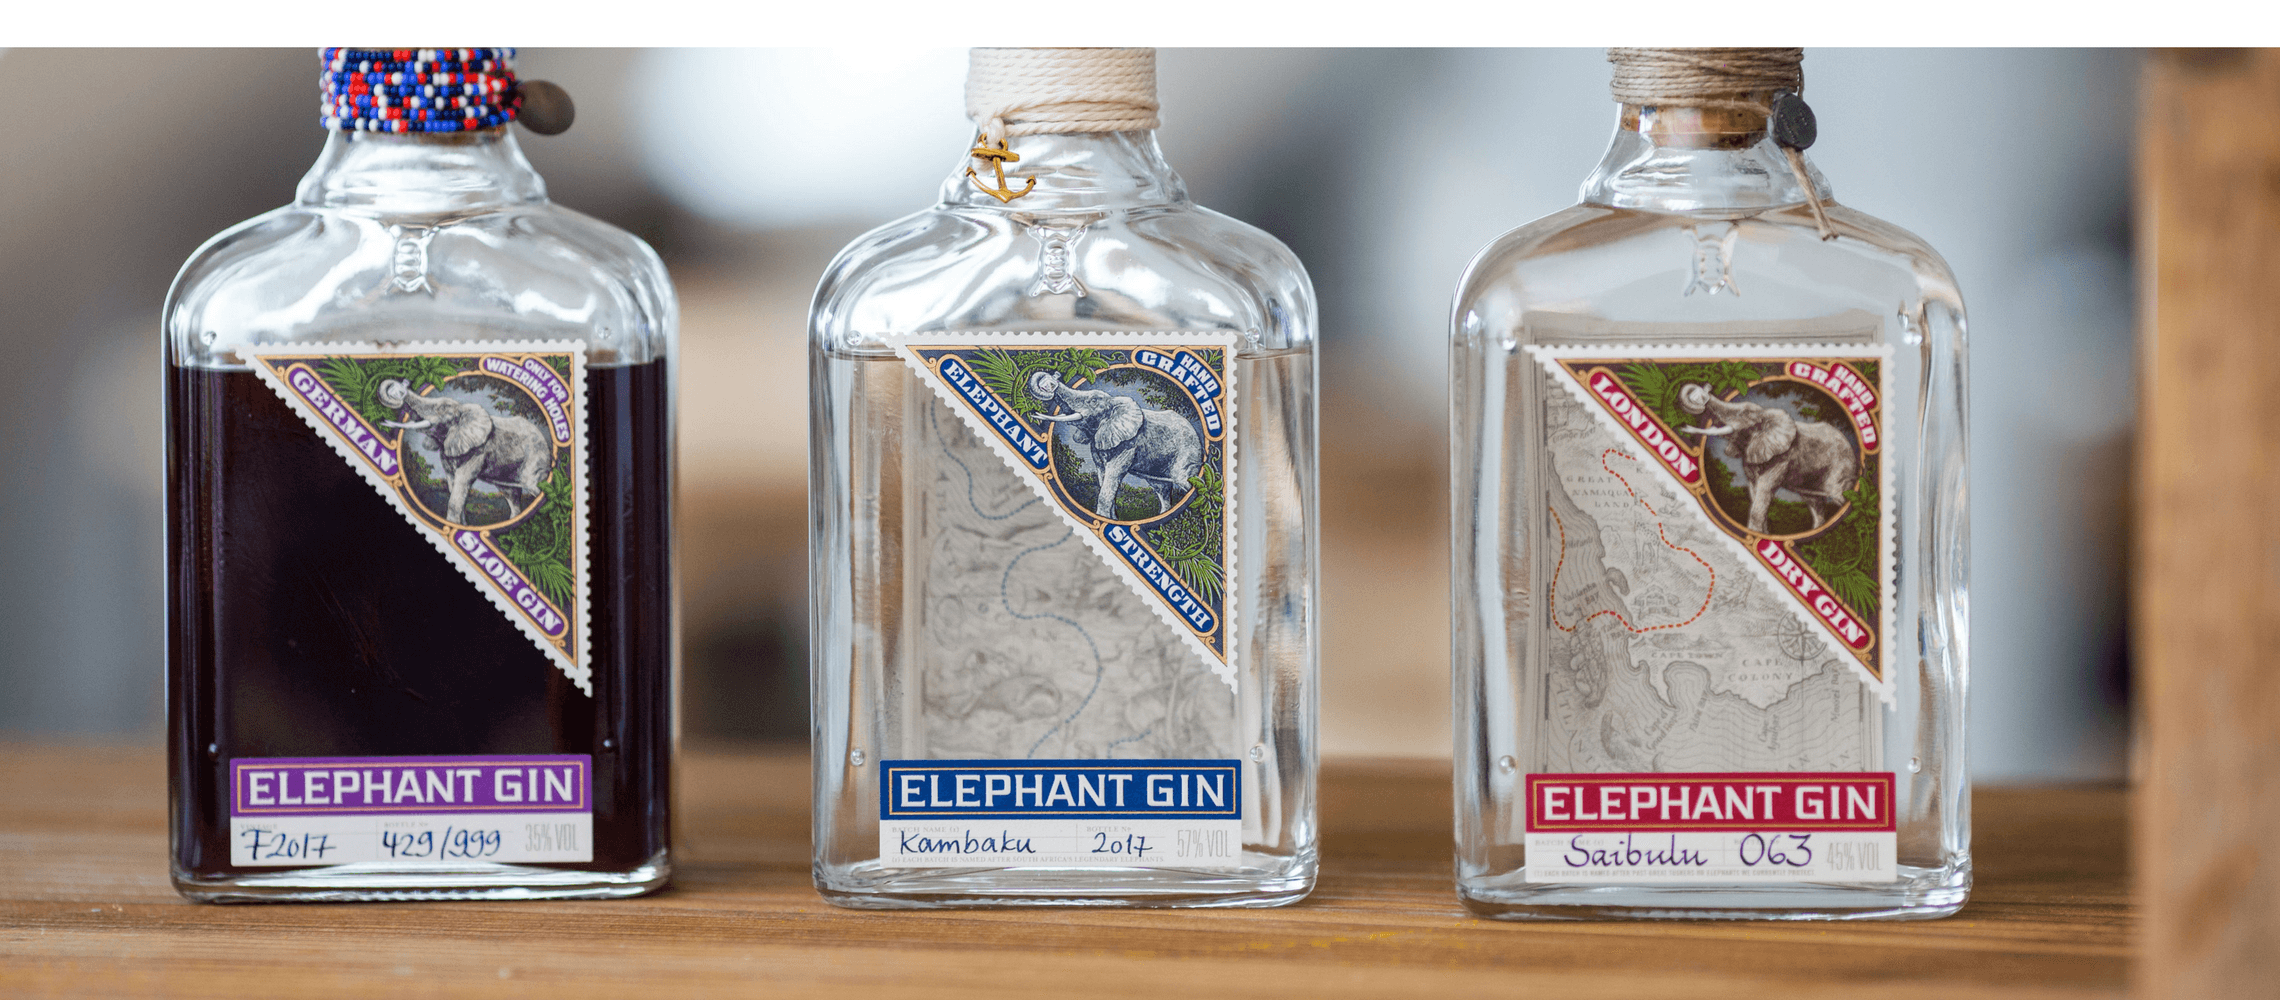 Photo for: LSC Welcomes Germany's Premium Dry Gin